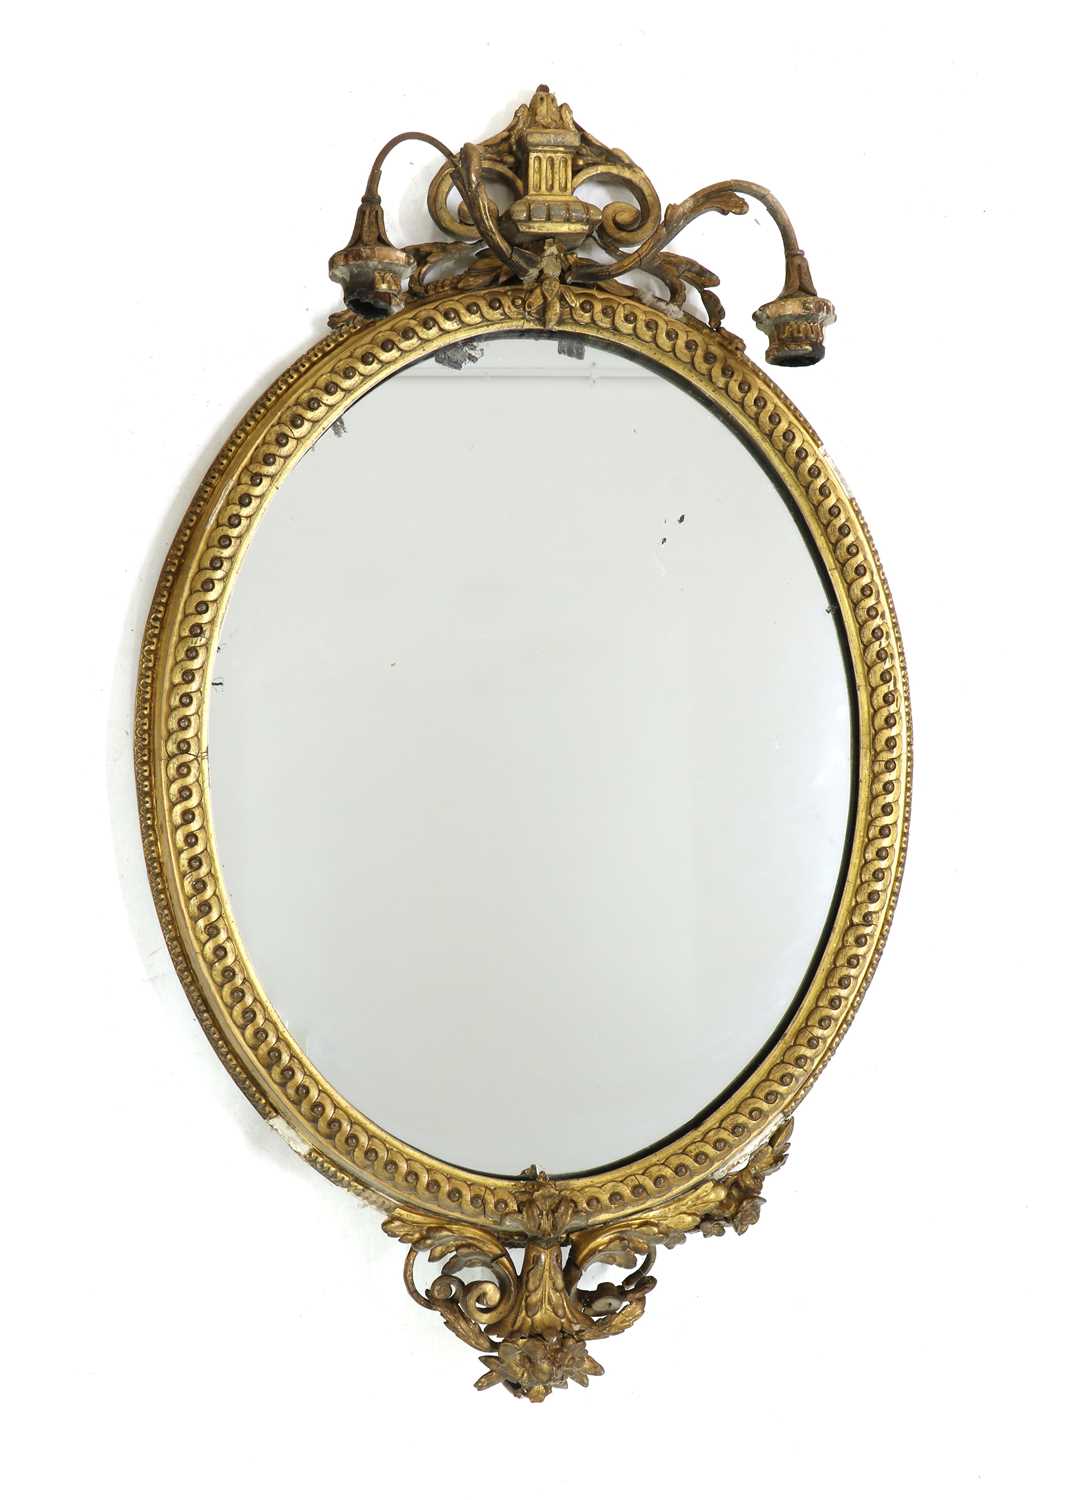 Lot 254 - An Edwardian Neo-Classical style oval giltwood wall mirror